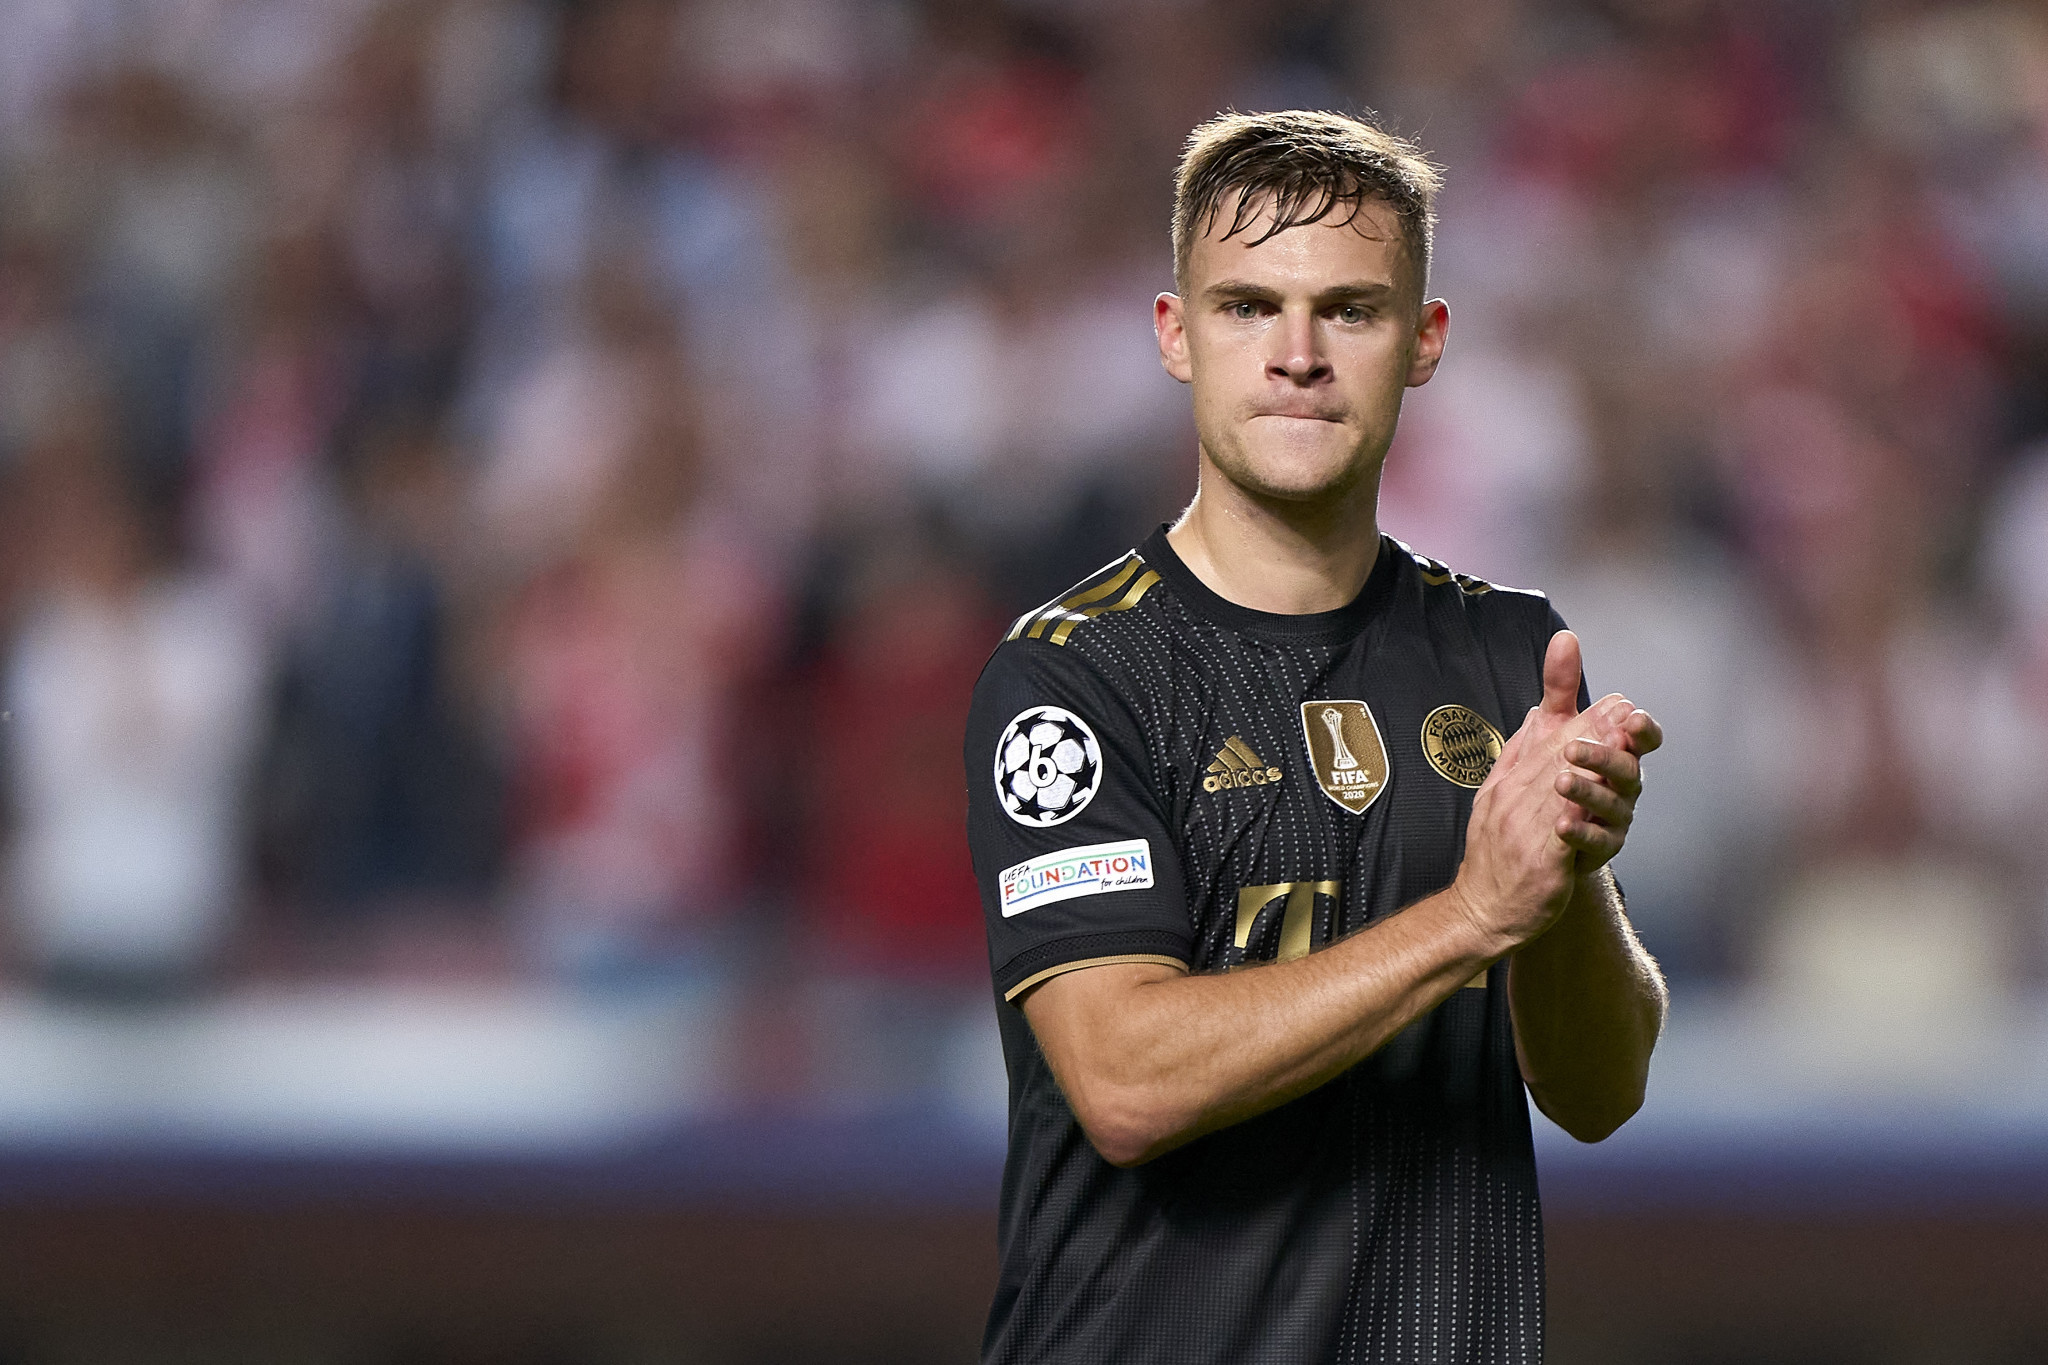 DOSB backs vaccination appeal as German football star Kimmich admits to not taking COVID-19 jab